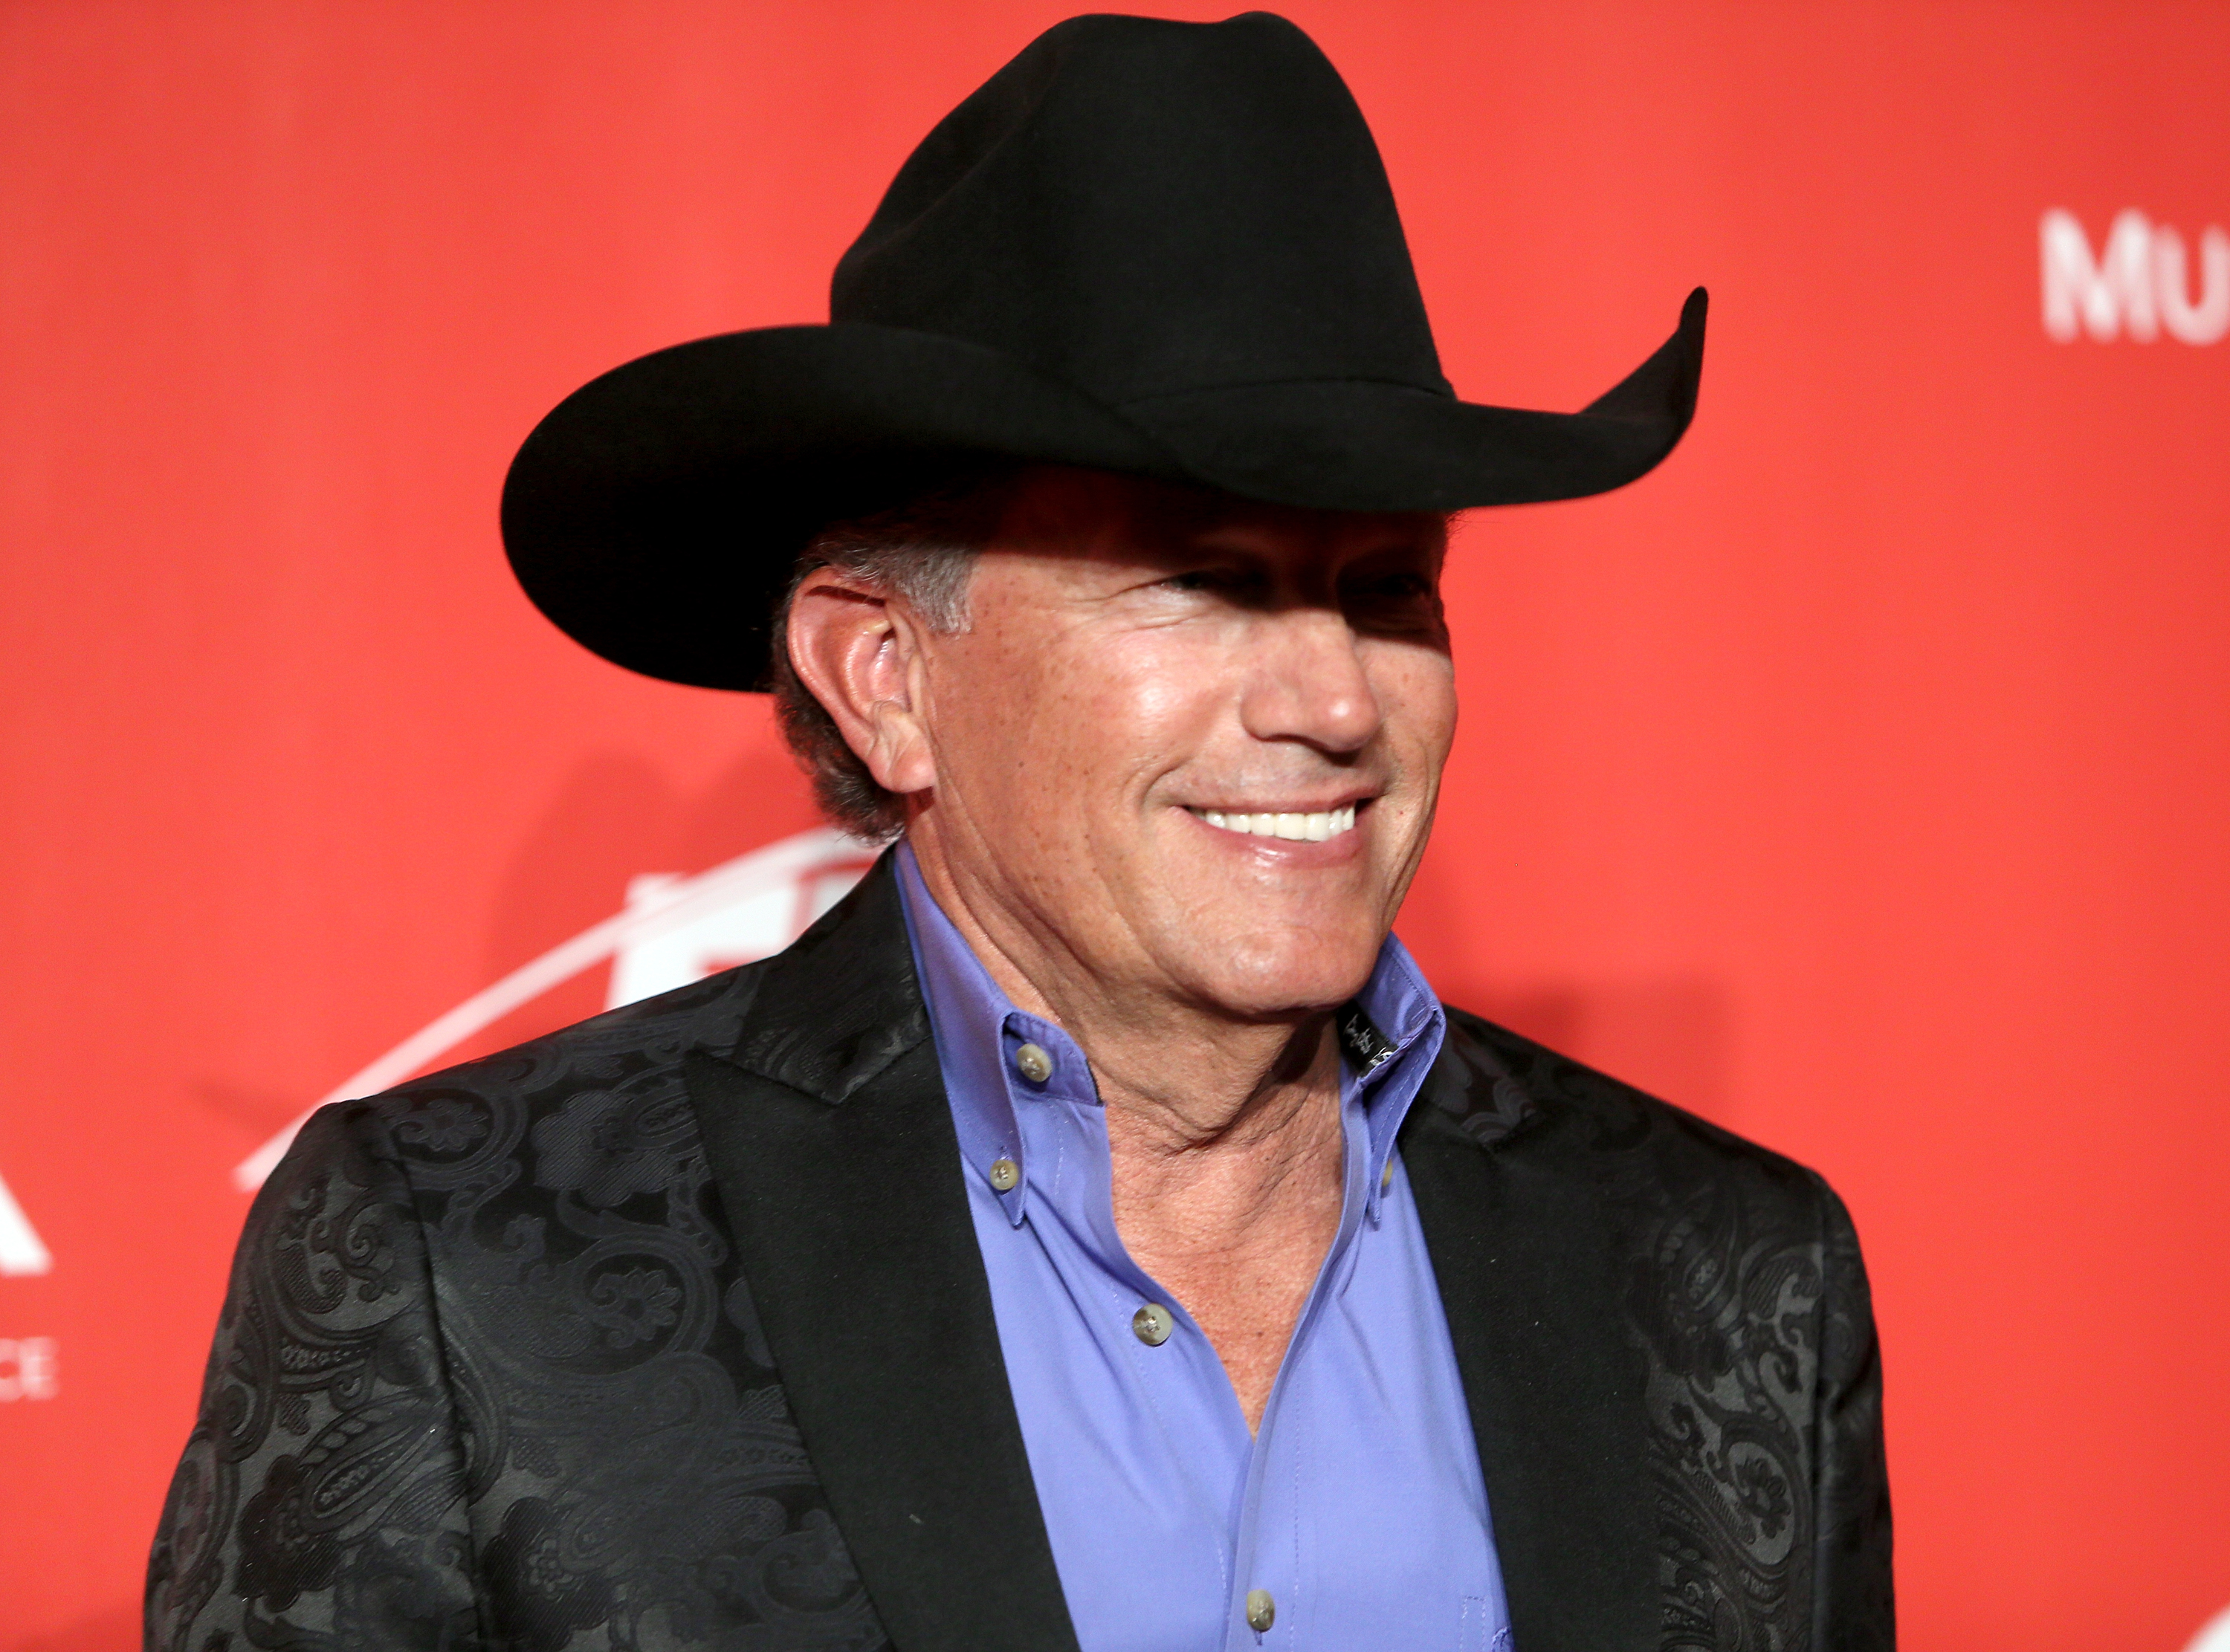 George Strait at the 2017 MusiCares Person of the Year in Los Angeles